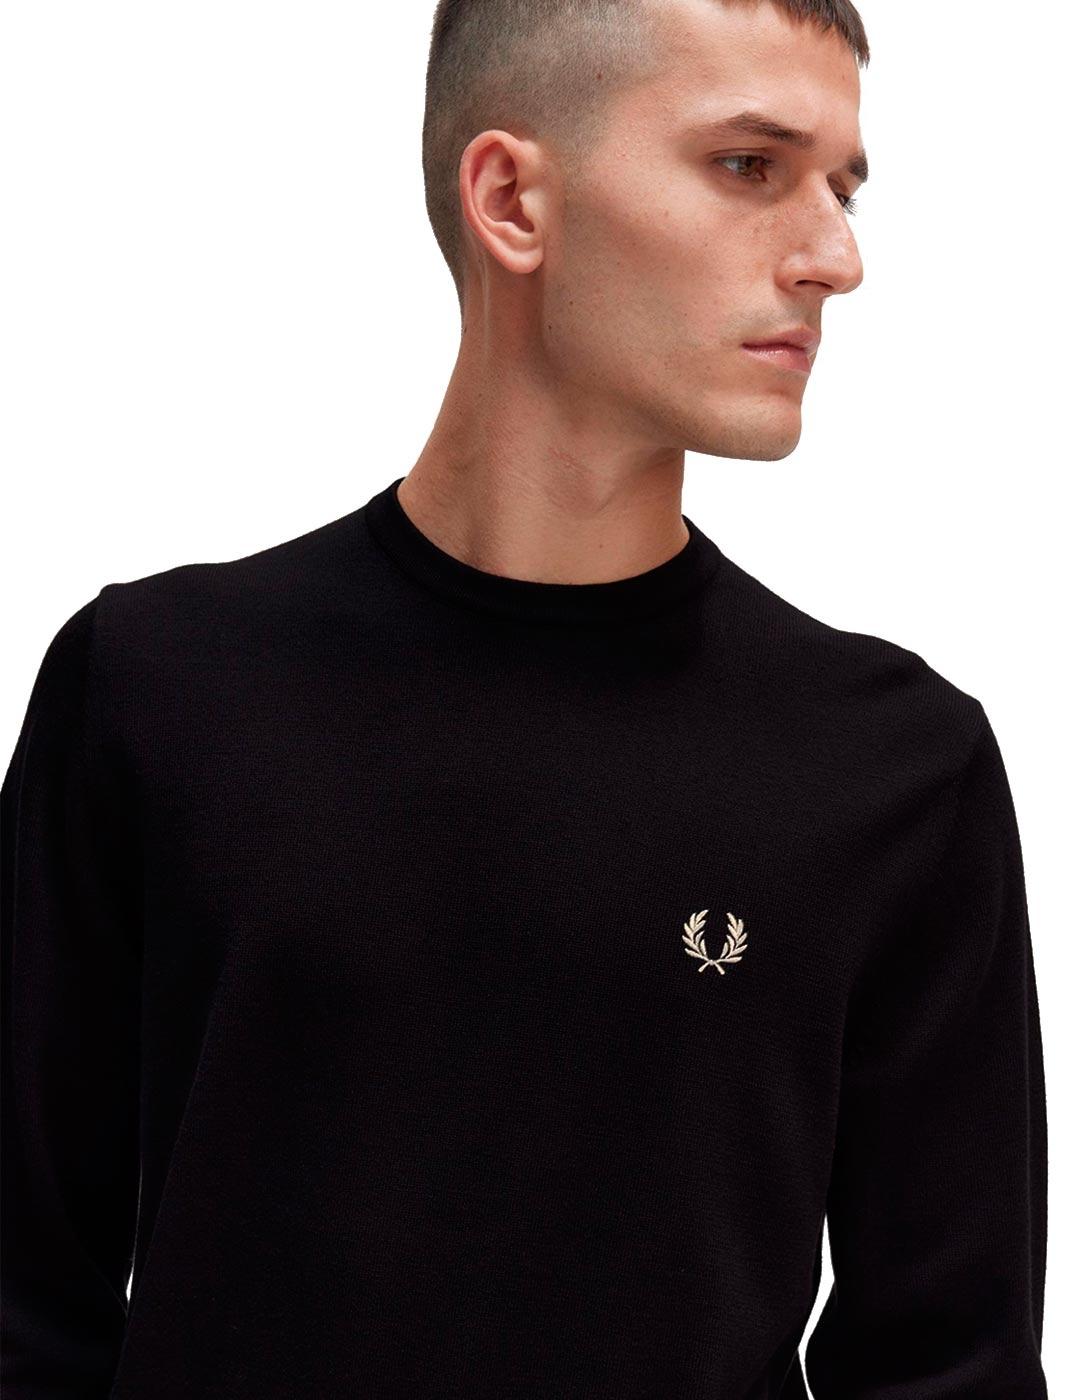 Jersey Fred Perry K9601 Negro